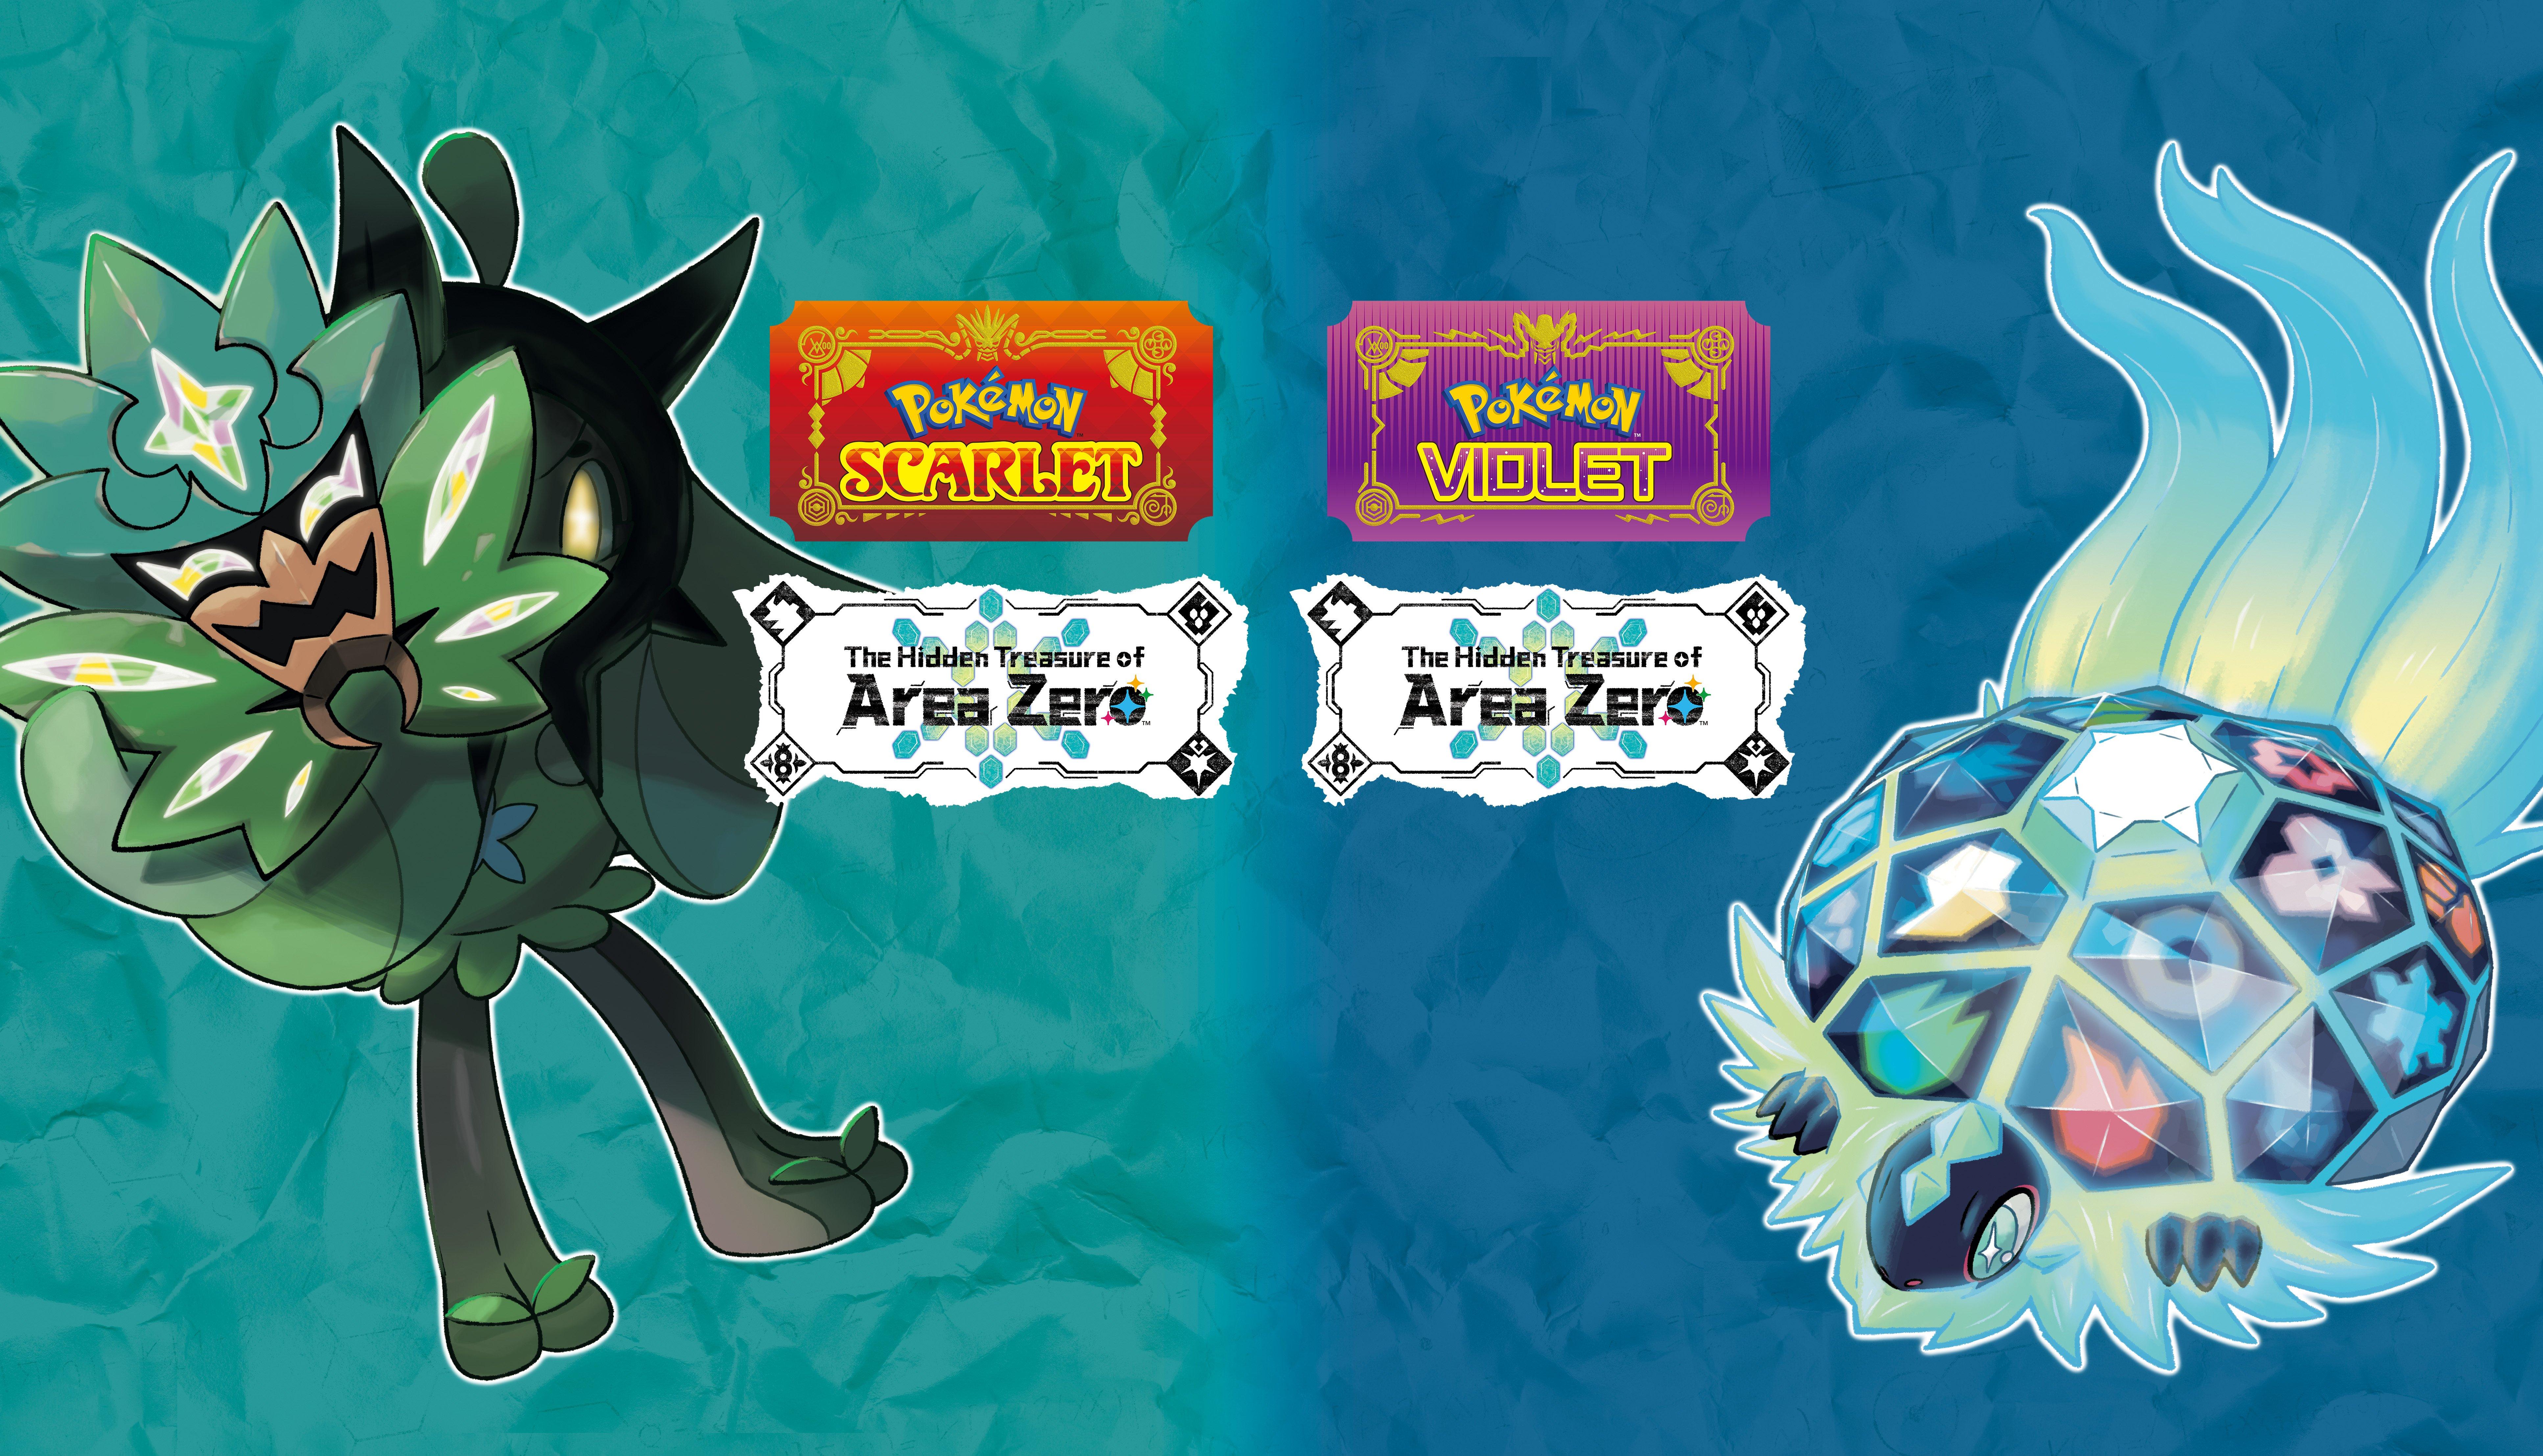 Pokemon Scarlet and Violet: The Teal Mask DLC release times